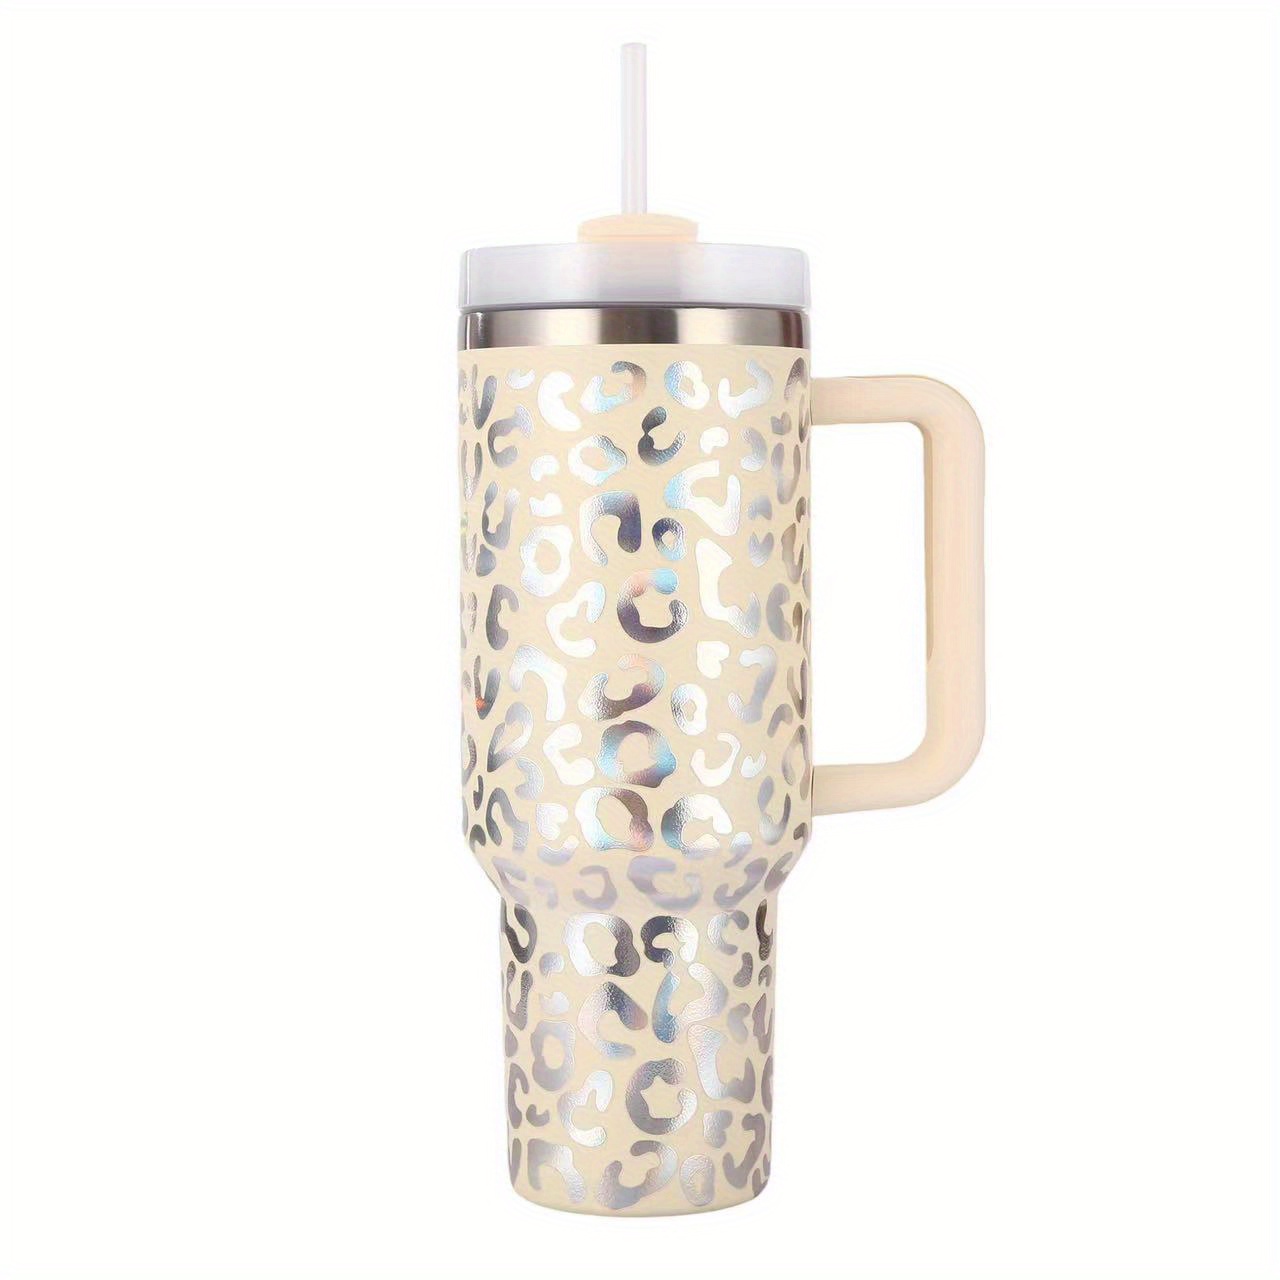 40oz Leopard Stainless Steel Tumblers With Handle Bling Water Bottle  Portable Outdoor Sports Cup Beer Mug Insulation Travel Vacuum Flask Bottles  Z11 From Hc_network005, $8.56